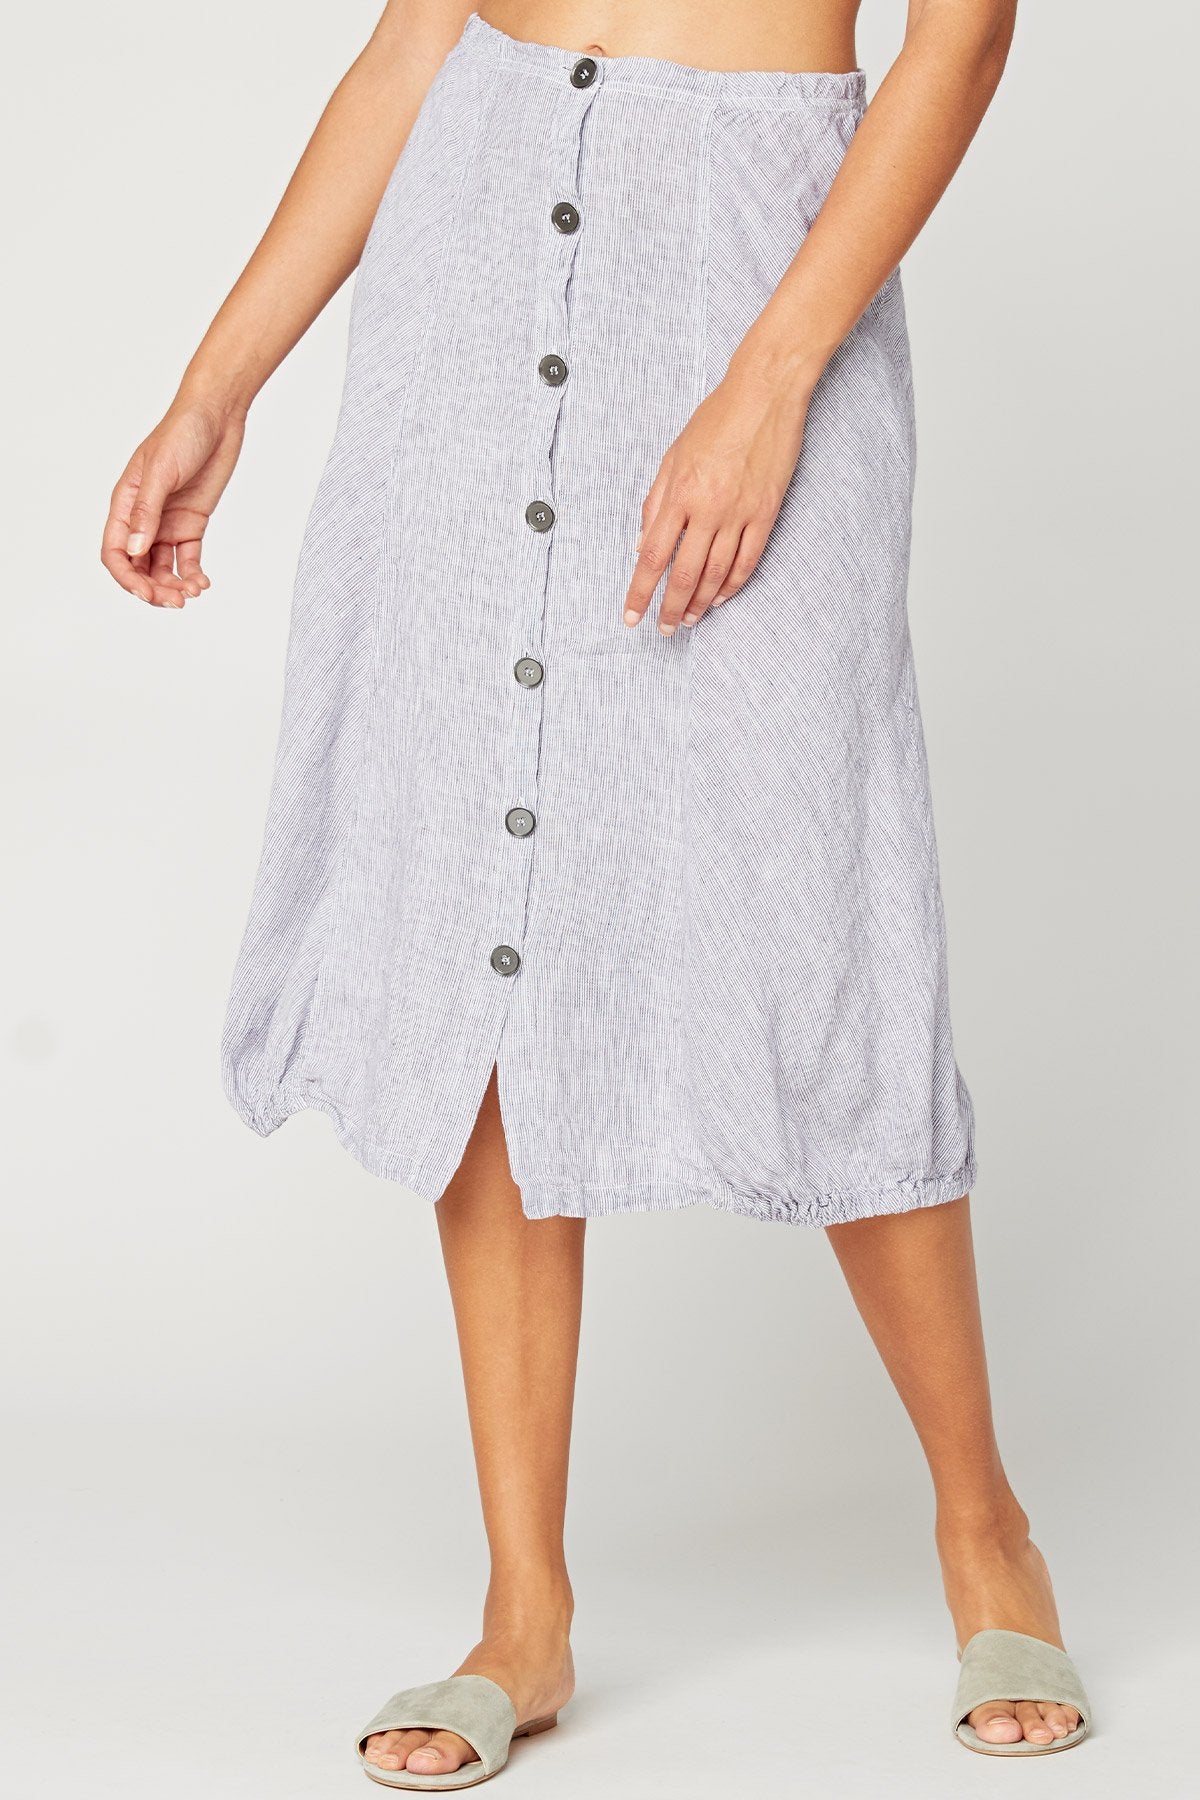 Xcvi Exposed Buttons Skirt In Gray